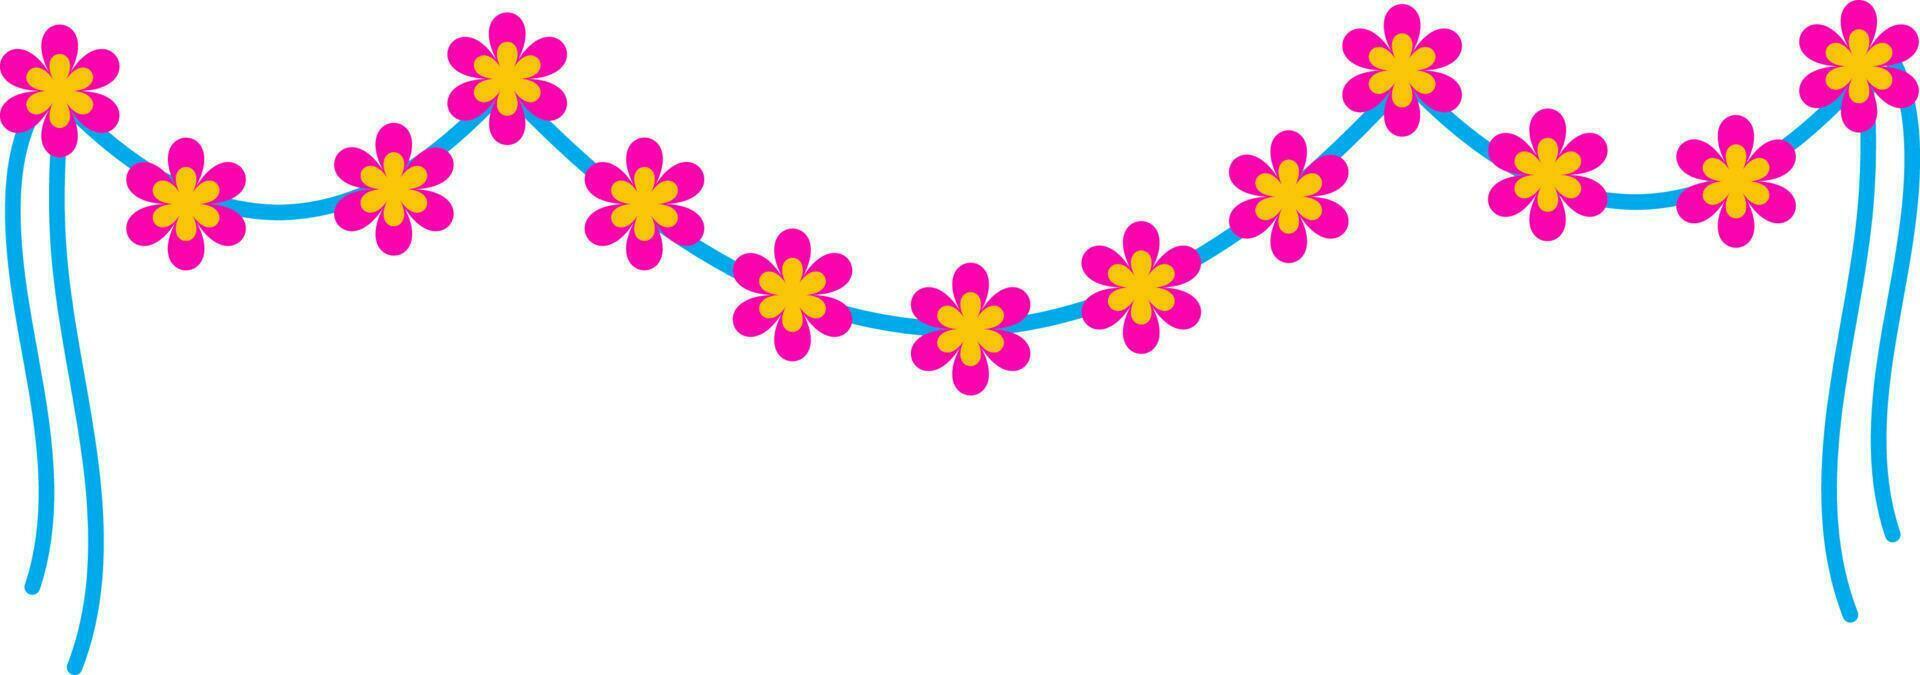 Pink And Yellow Flower Garland Decoration Flat Icon. vector